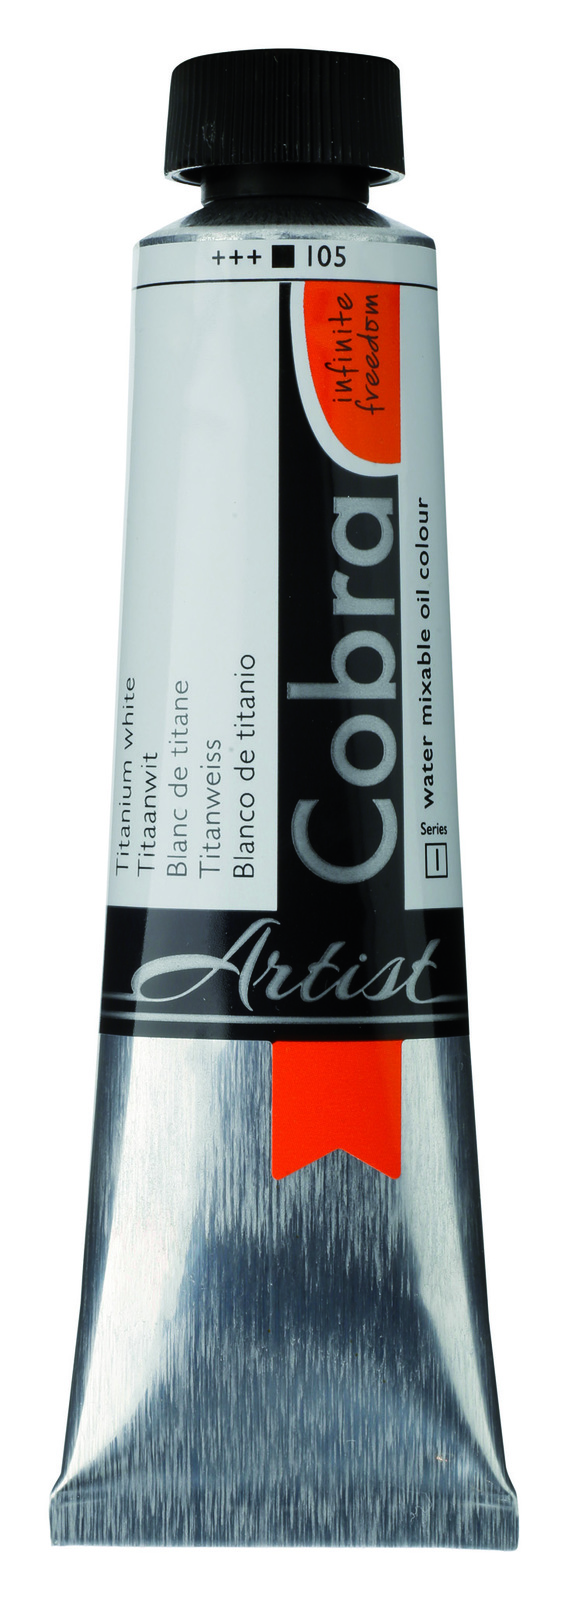 Cobra - water soluble oil paints. Does anyone use them? Is this